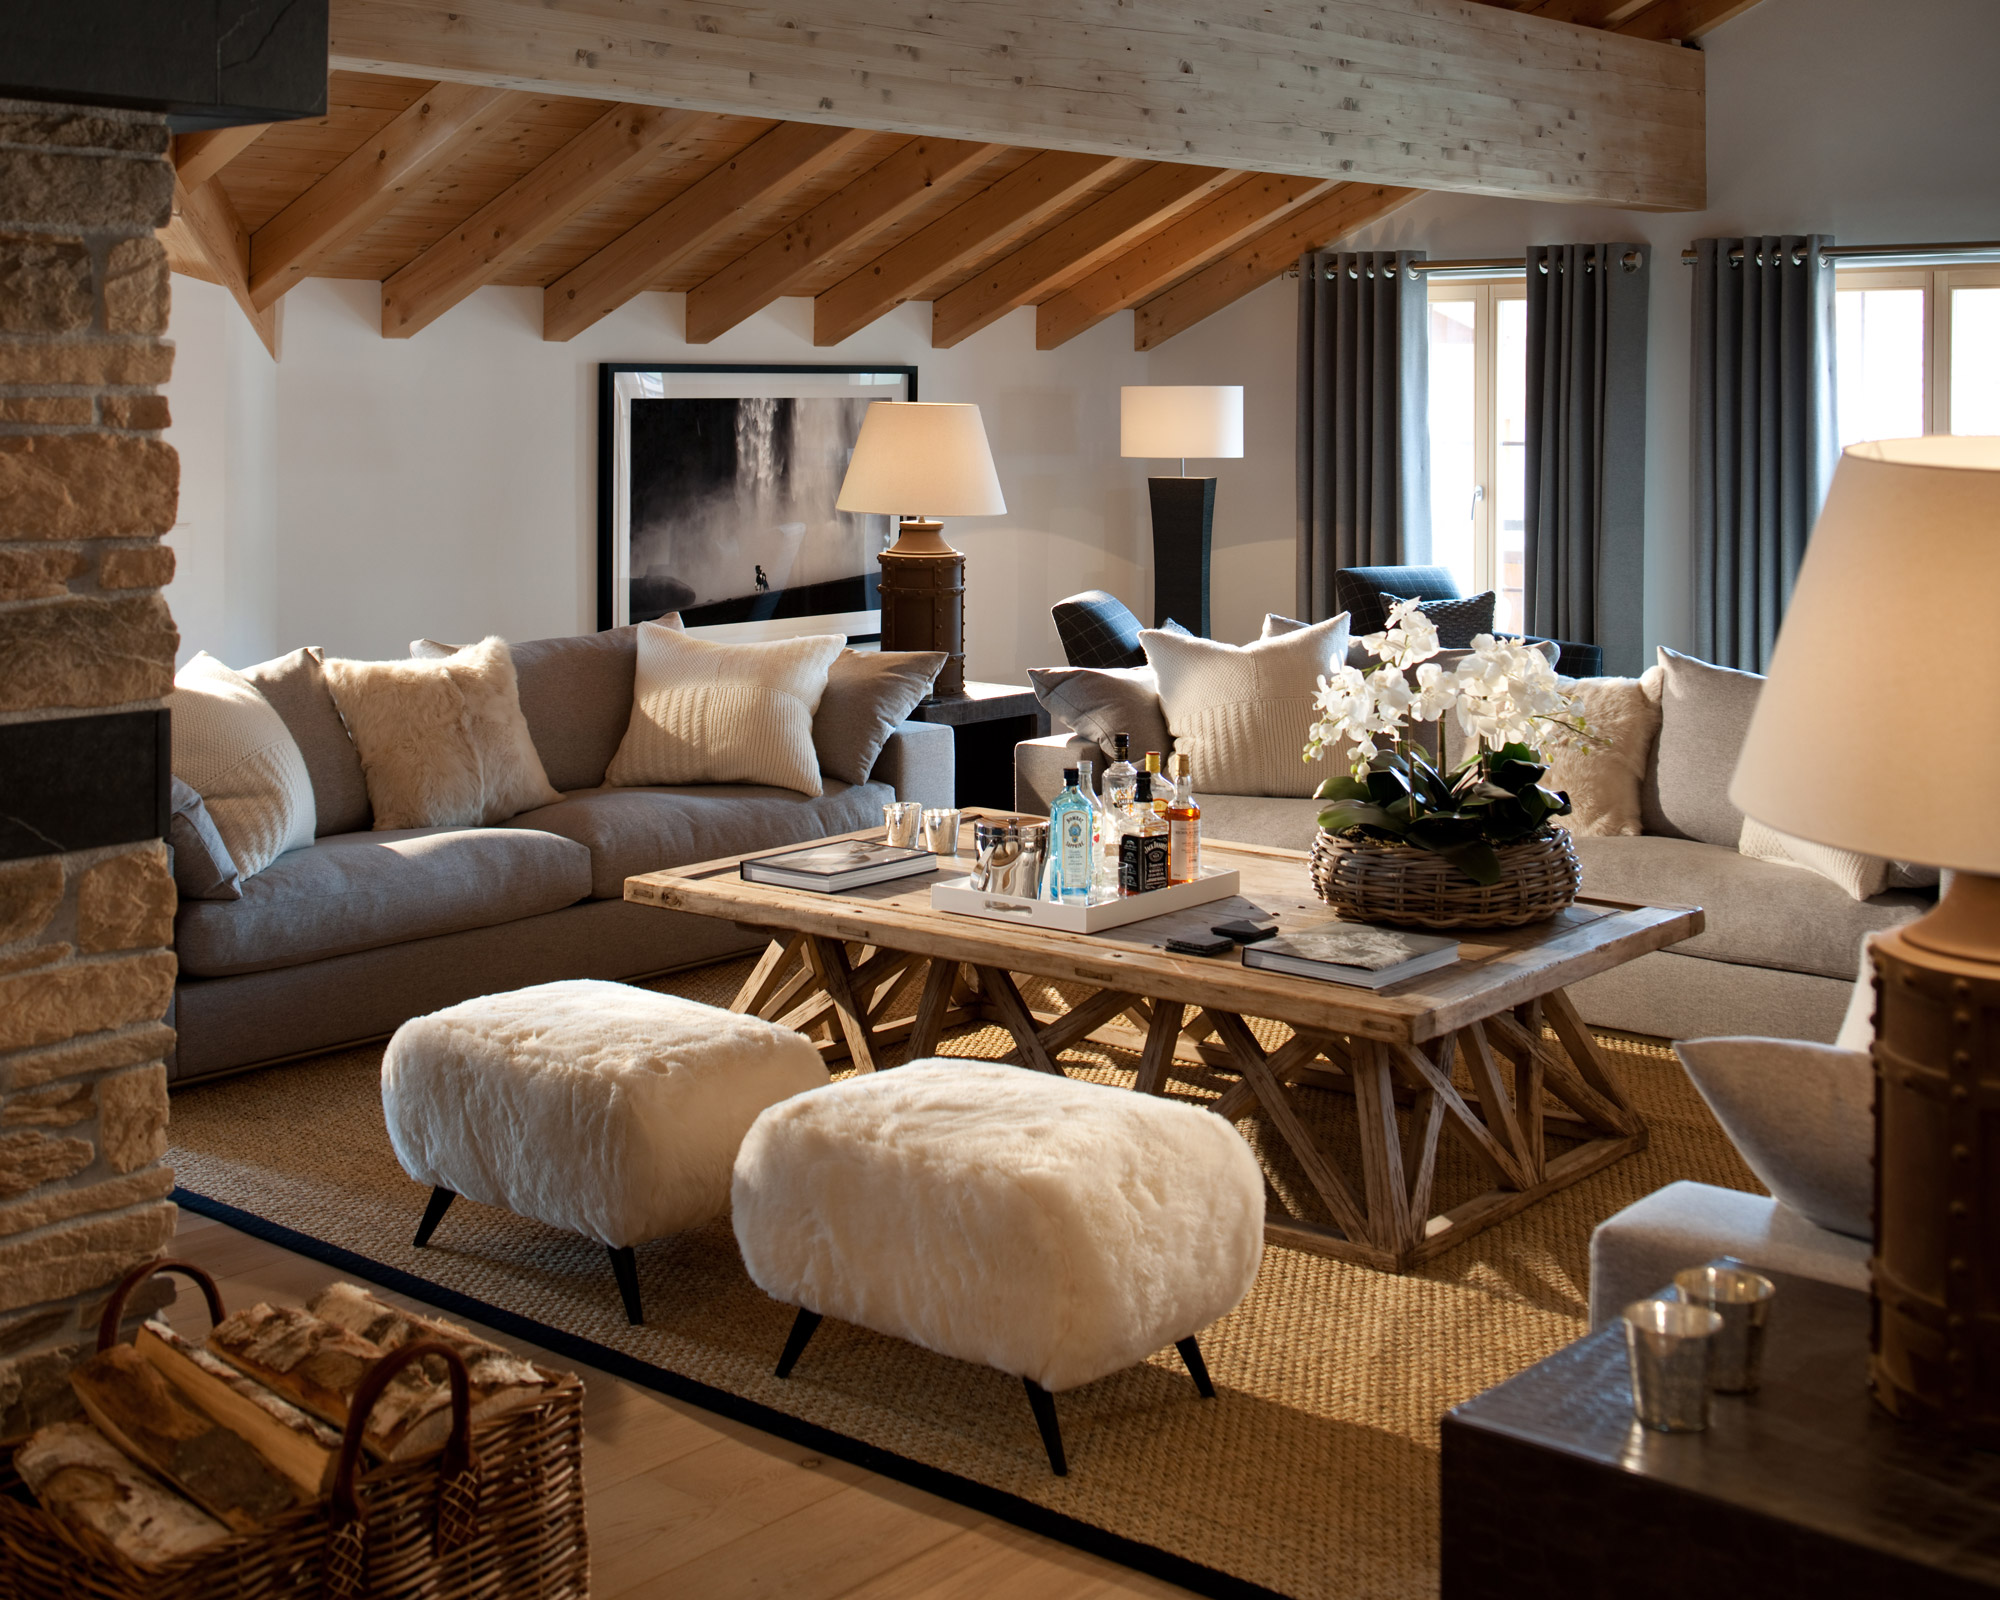 Cozy living room ideas Hibernate at home in a comfy, cocoon like ...